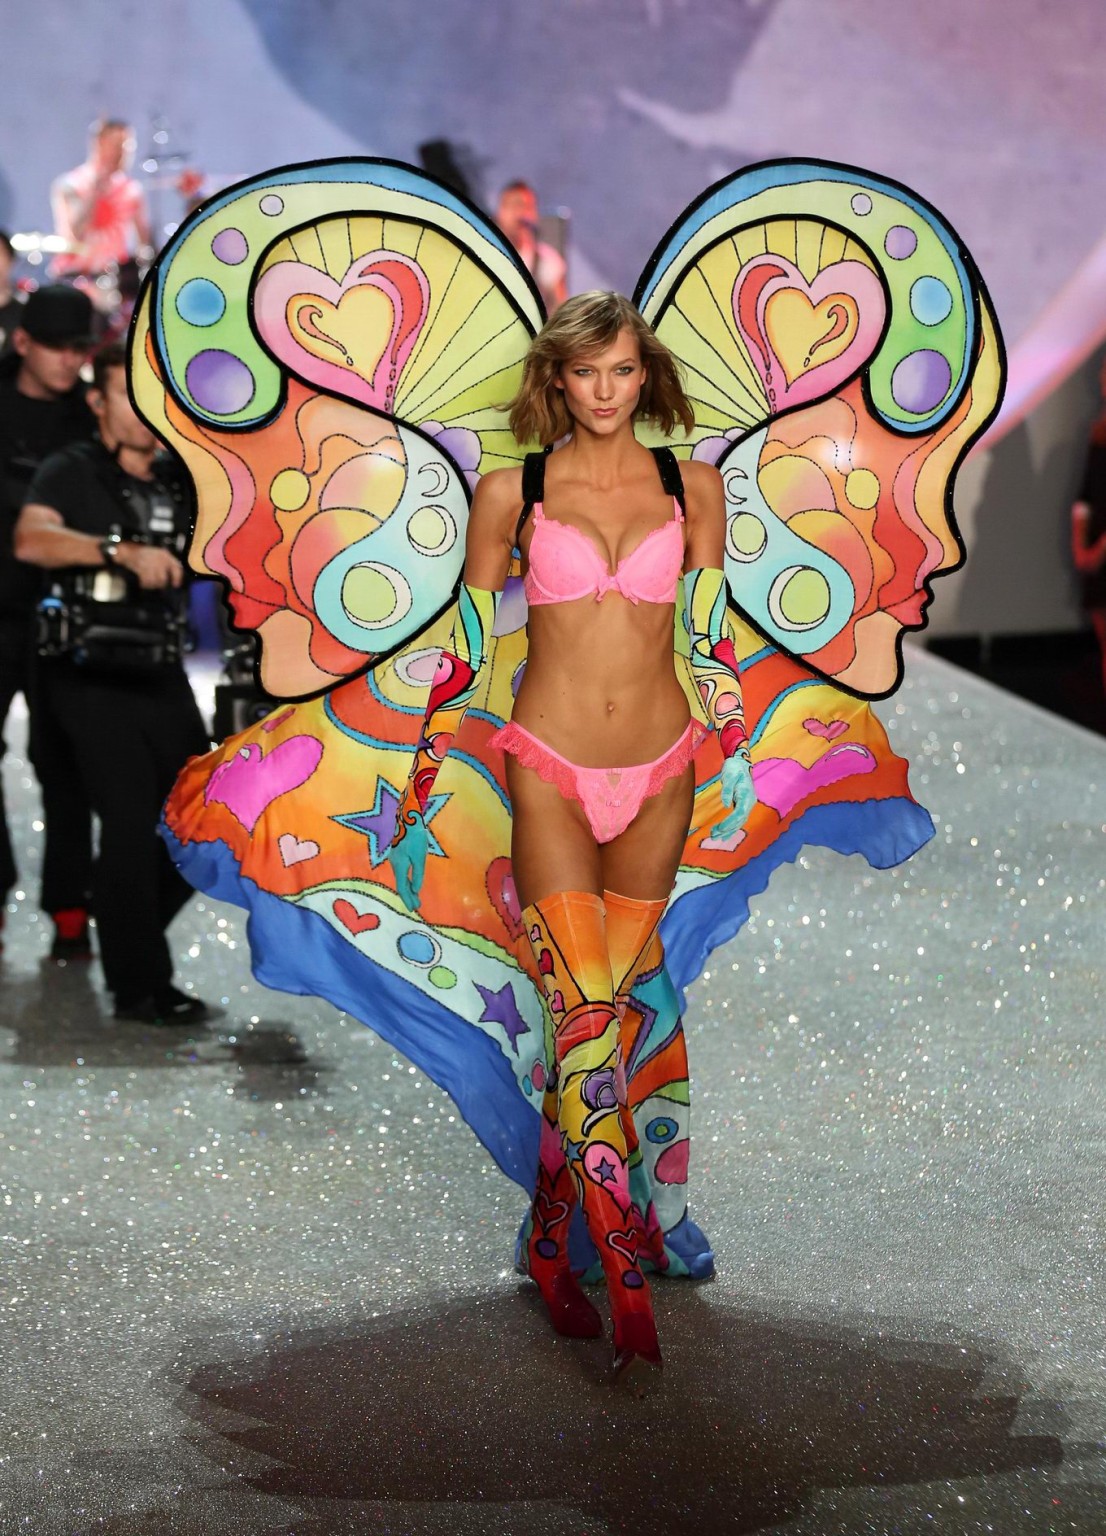 Busty Karlie Kloss wearing sexy lingerie at the 2013 Victoria's Secret Fashion S #75212803